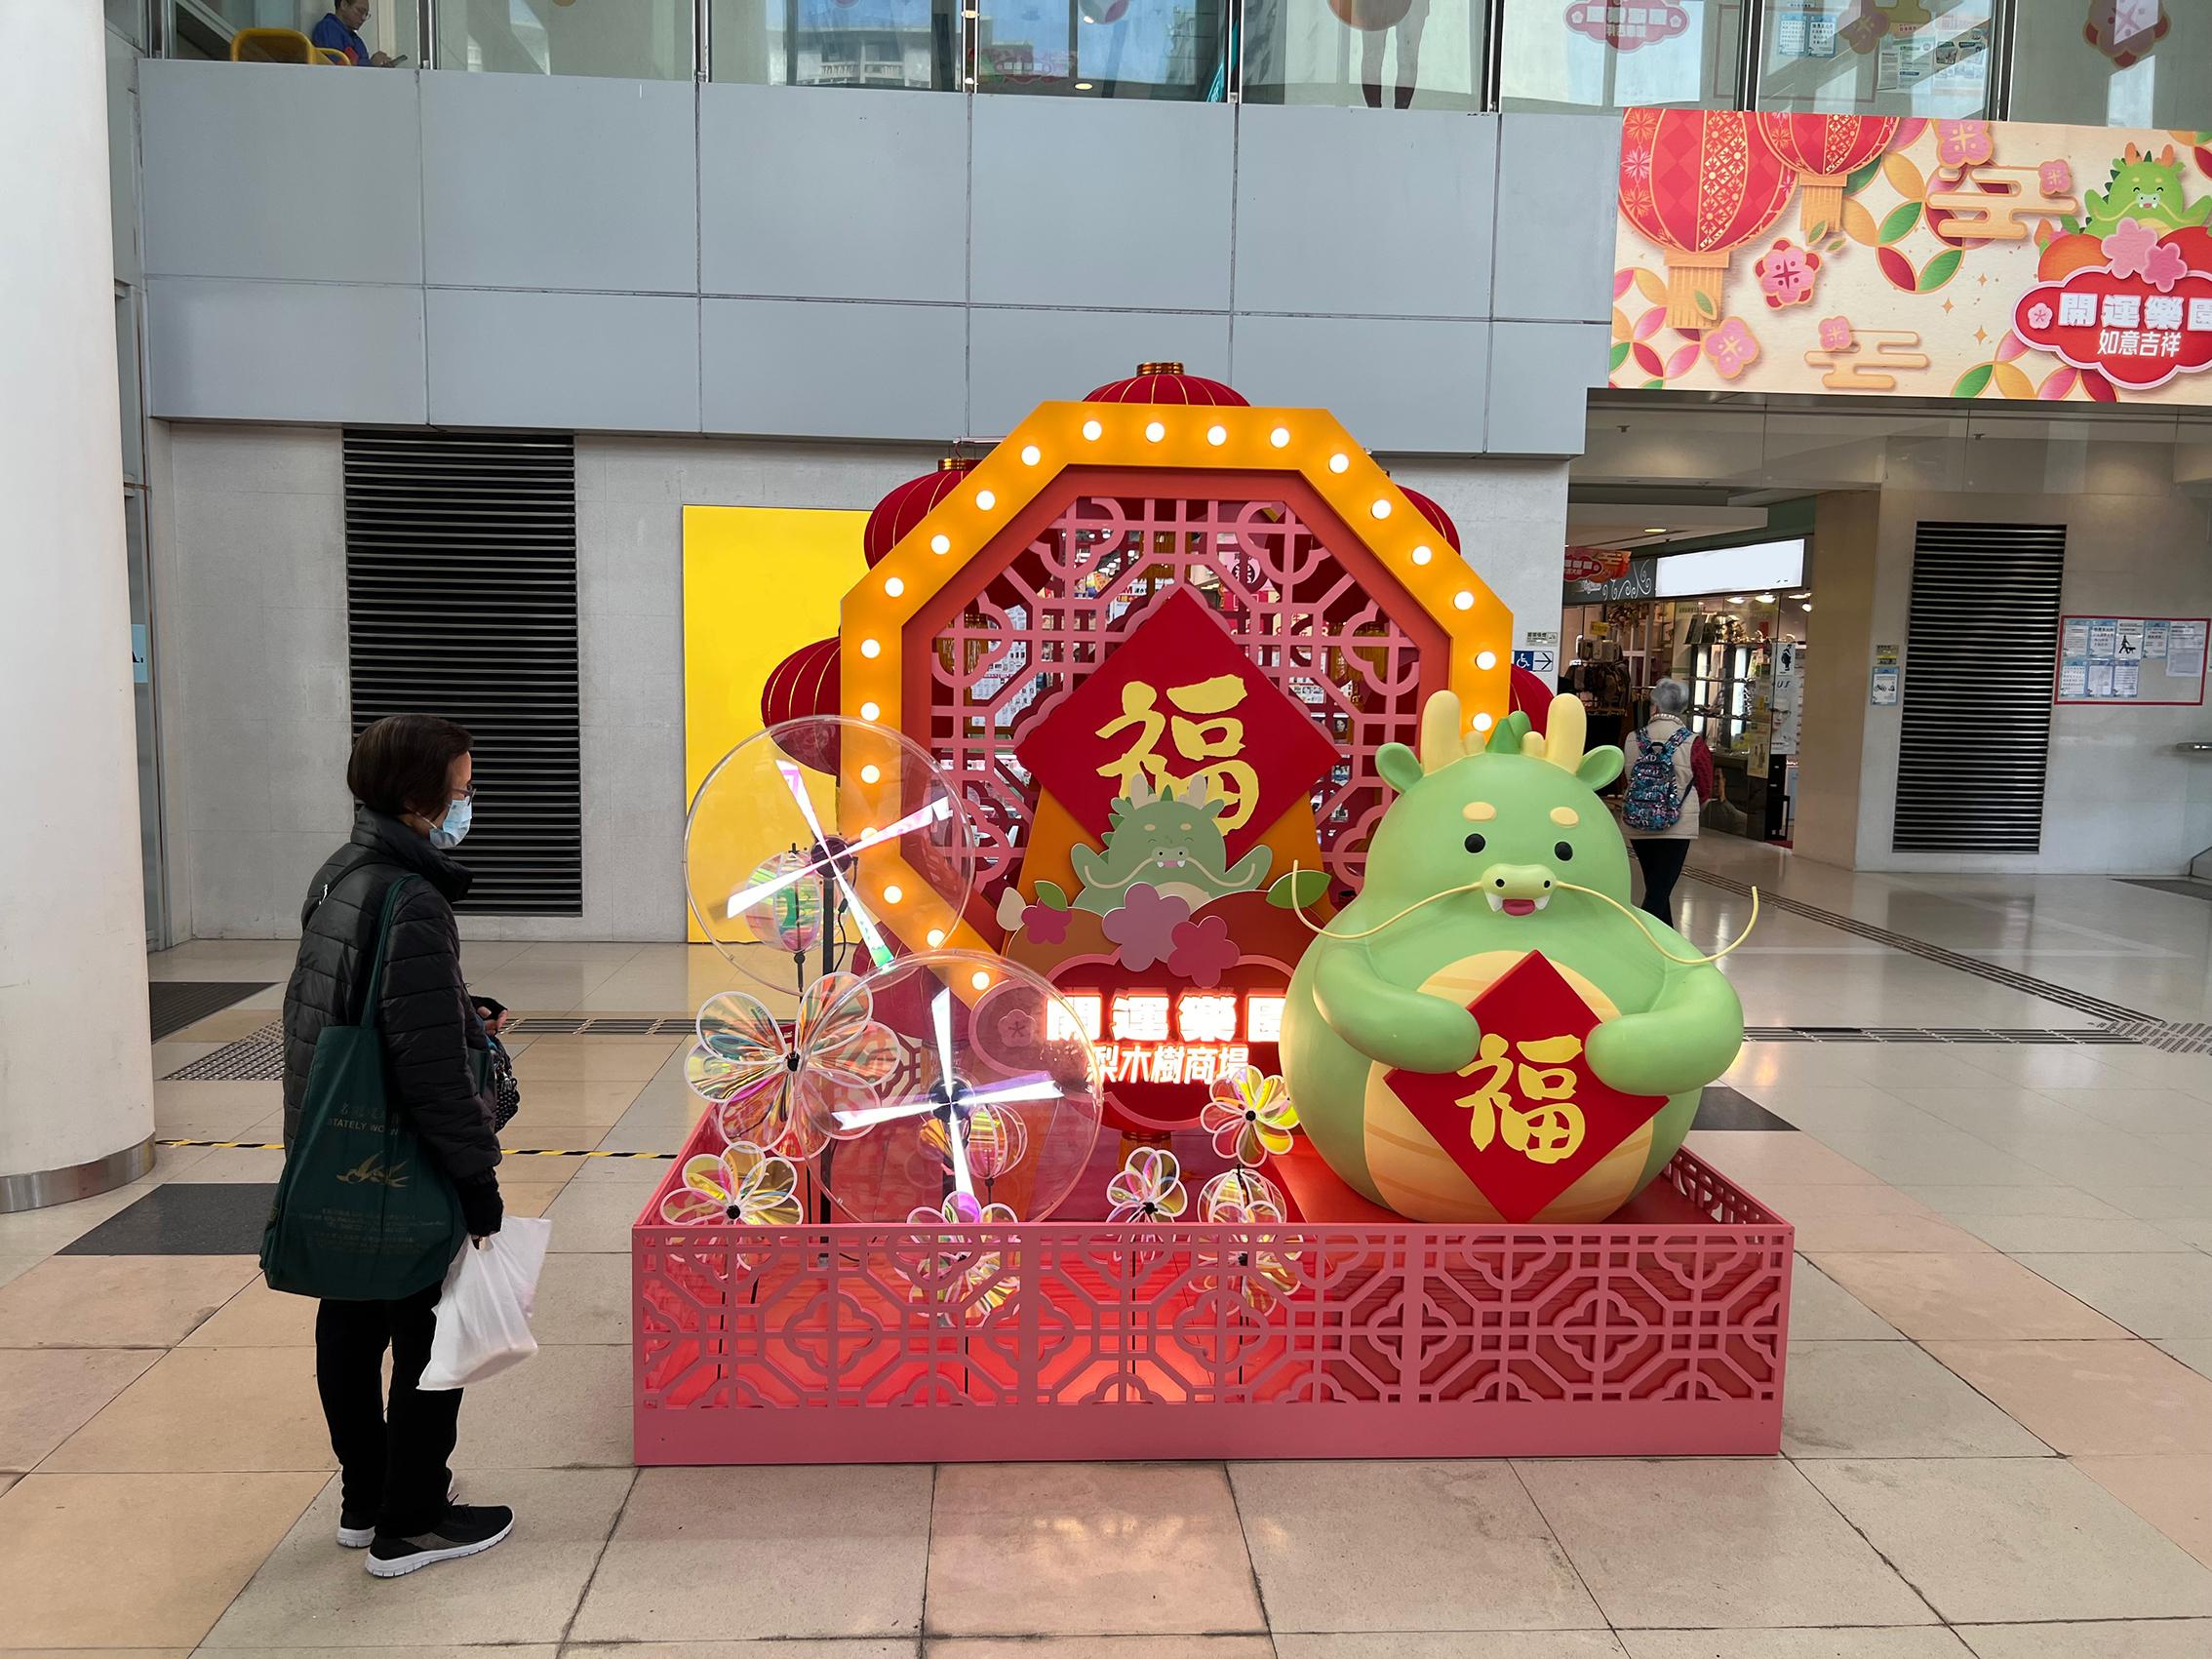 To welcome the Year of the Dragon, the Hong Kong Housing Authority has arranged celebratory events for shoppers to celebrate the new year and help boost the economy. Photo shows the festive New Year decorations at Lei Muk Shue Shopping Centre in Tsuen Wan.